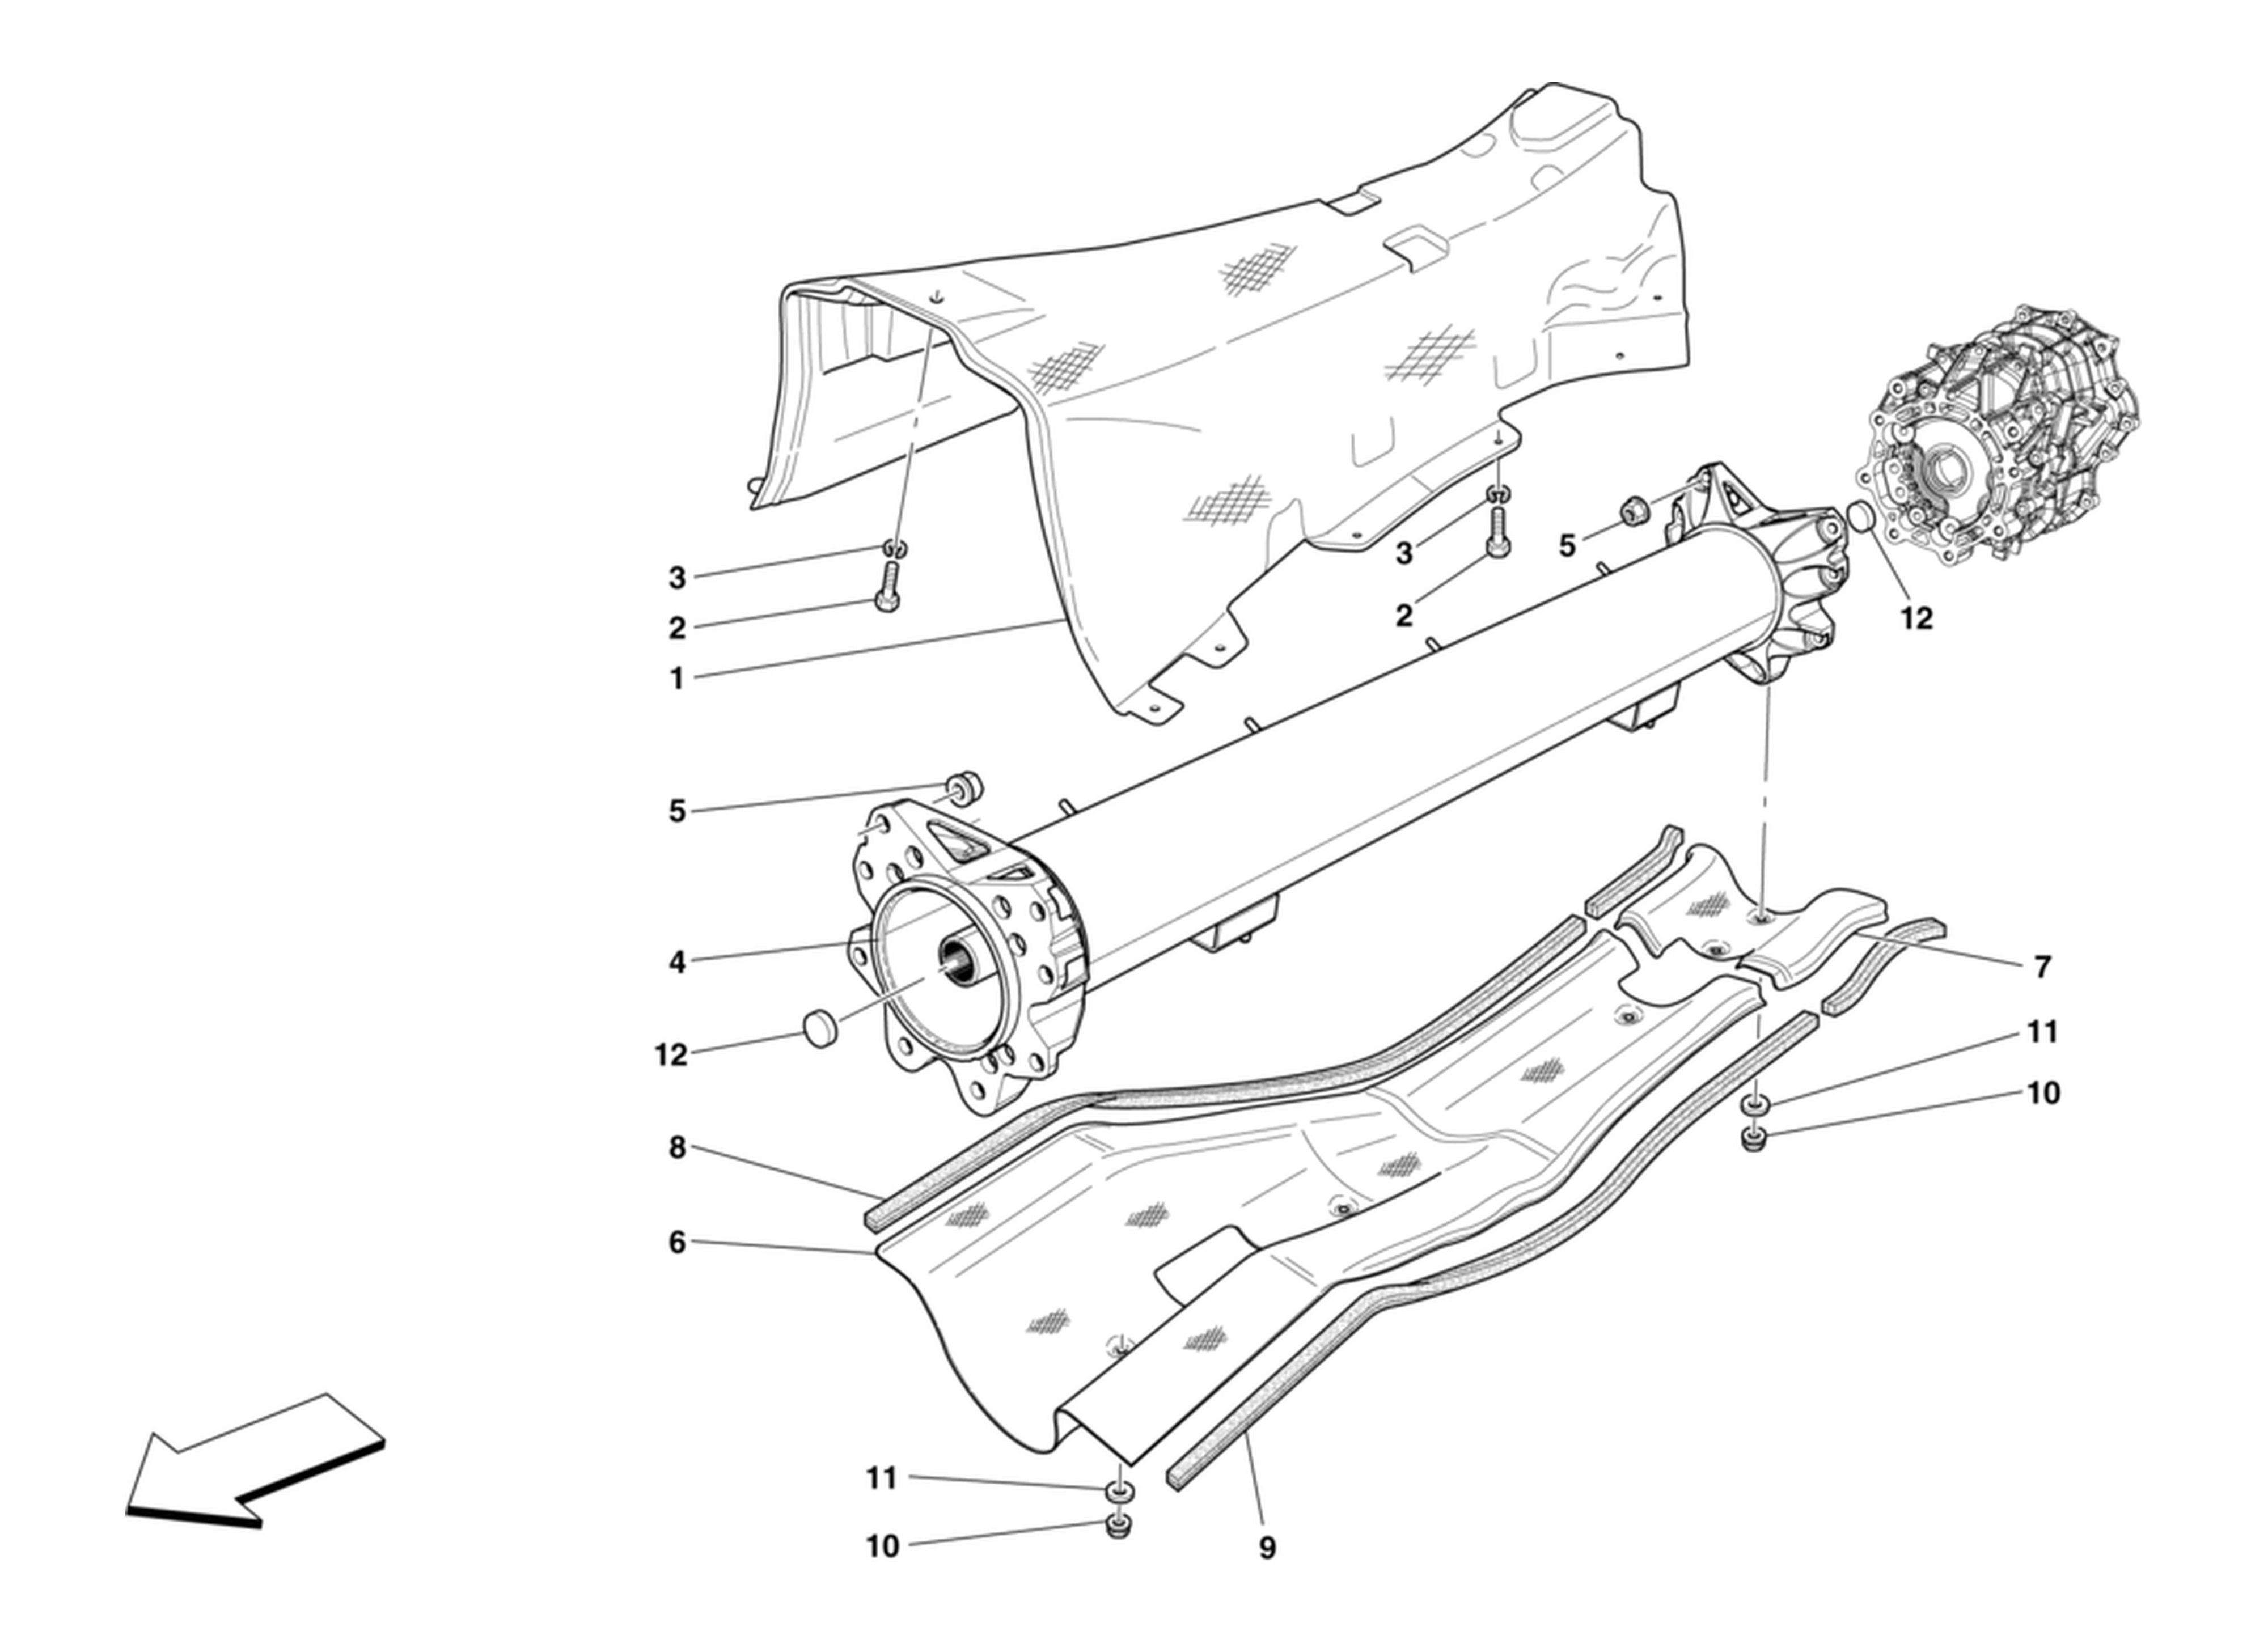 Schematic: Engine-Gearbox Connector Pipe And Insulation